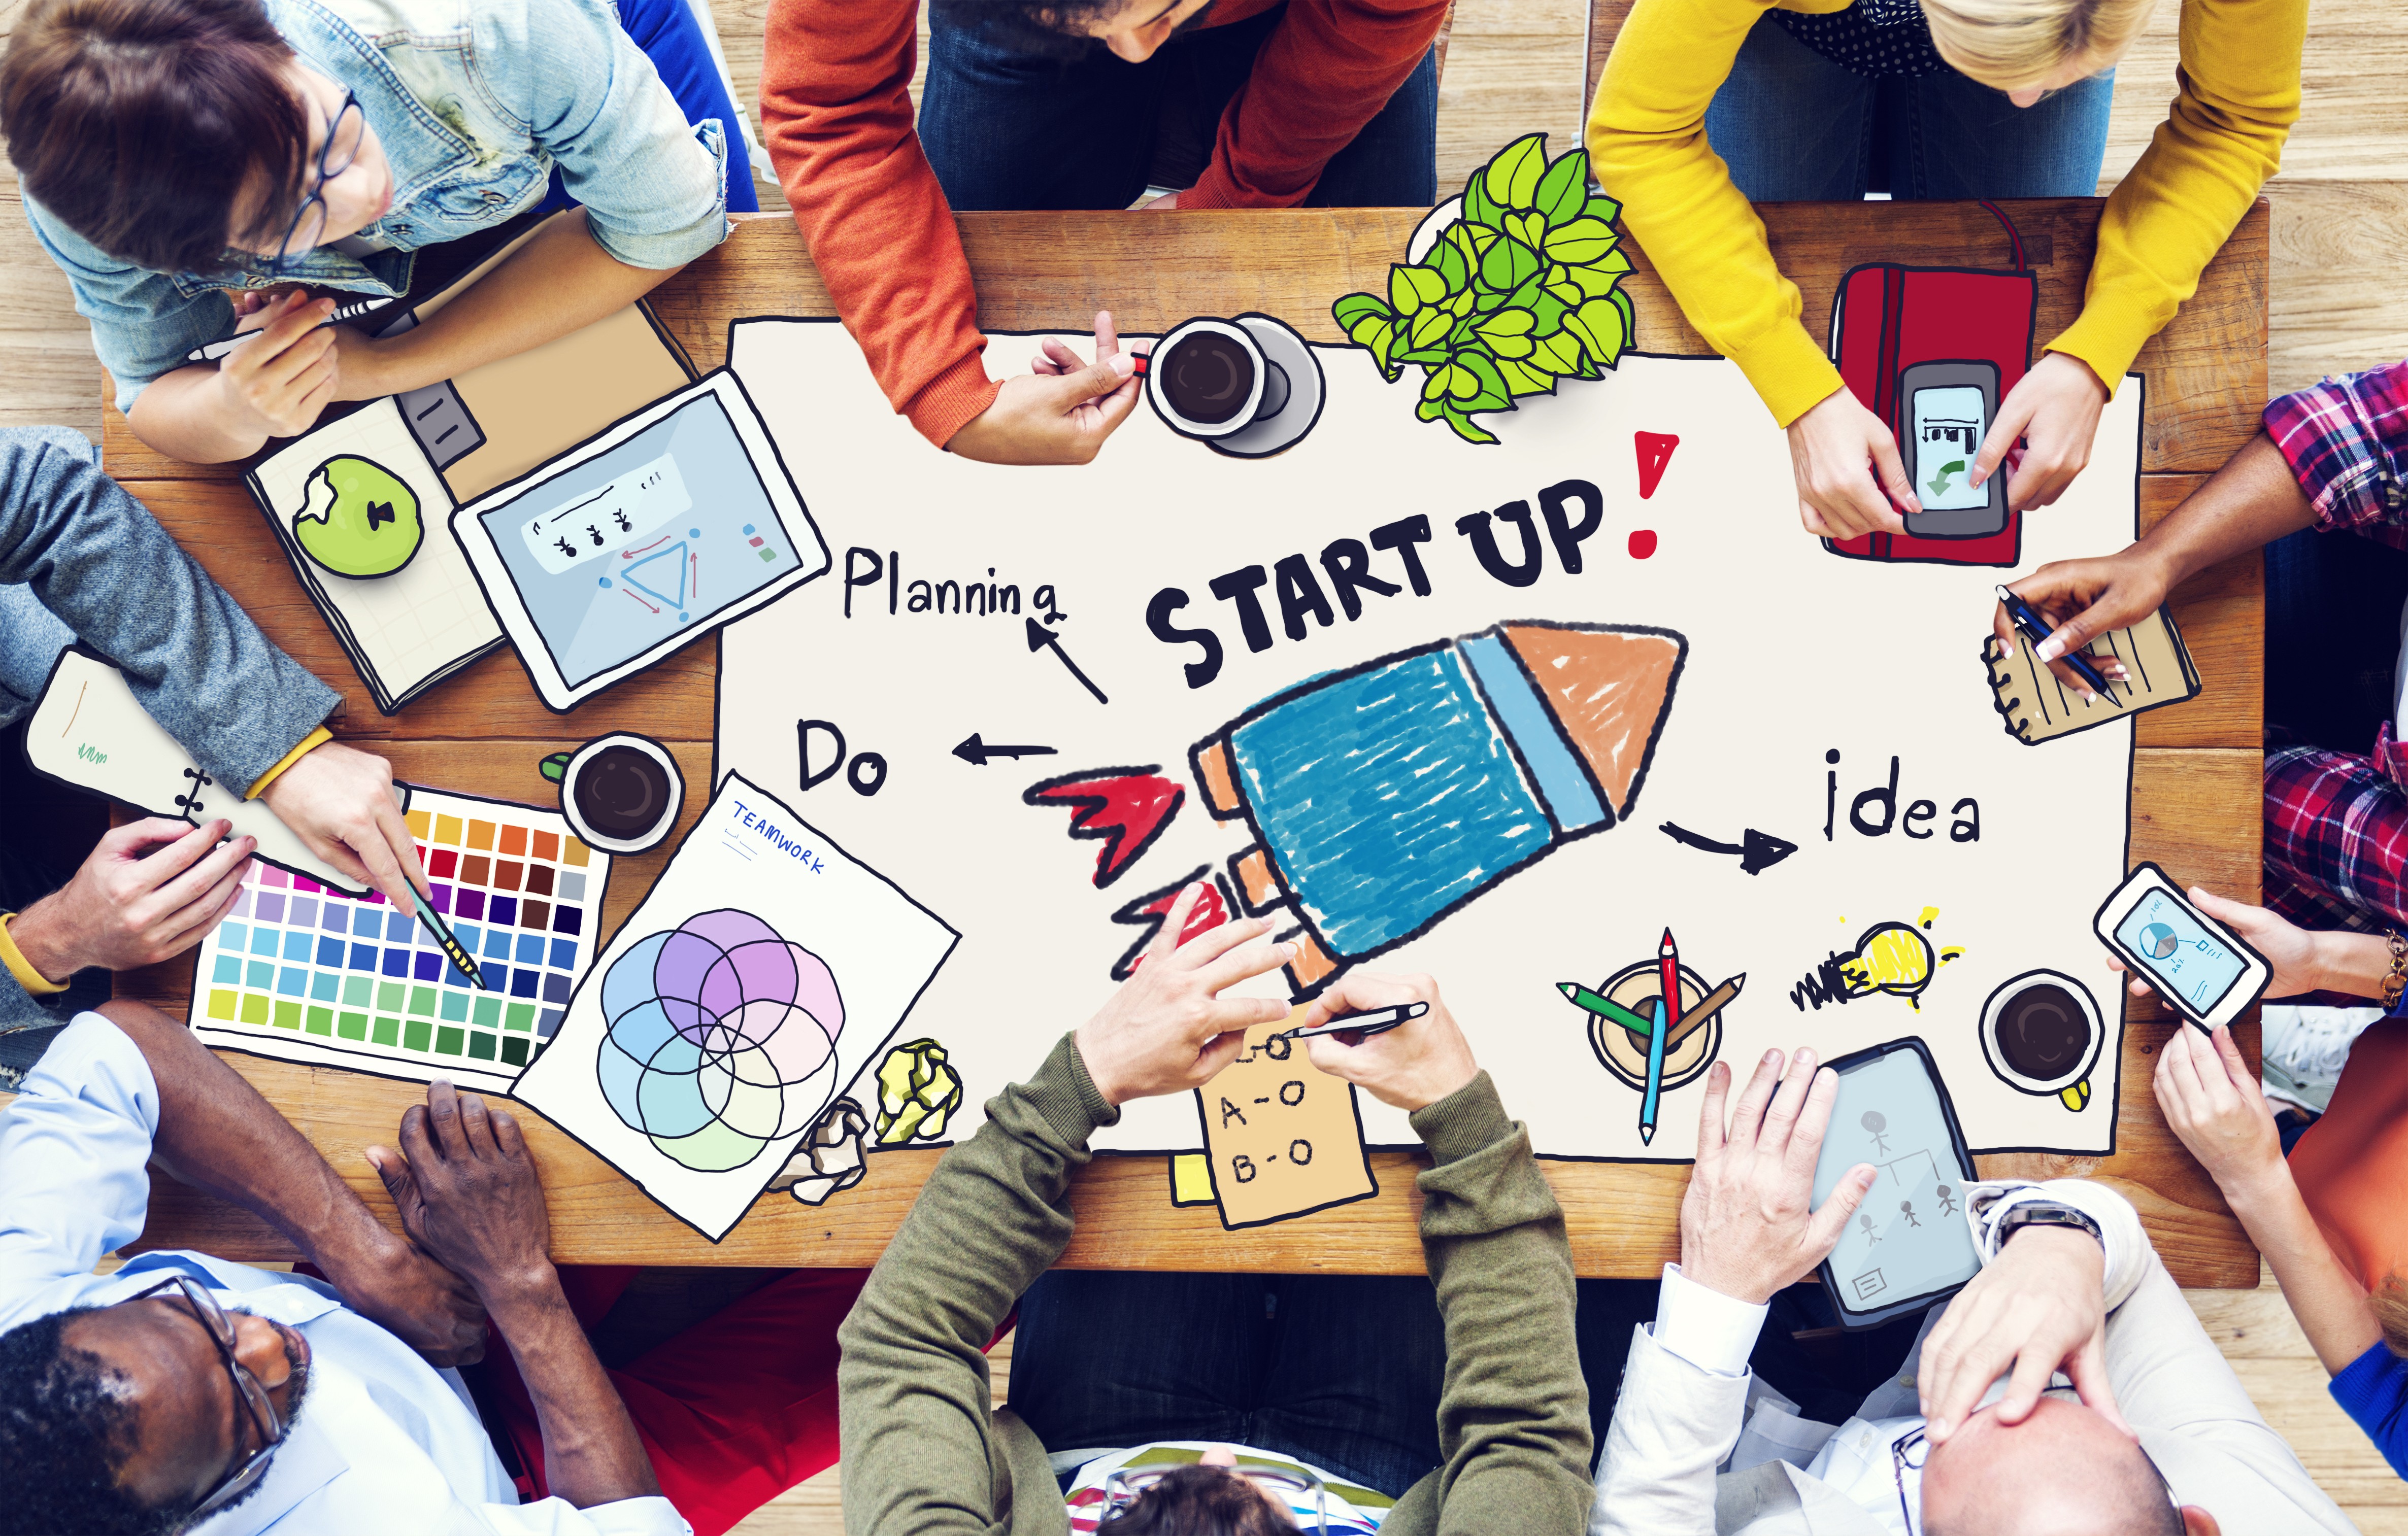 Many start-ups have great ideas, but to succeed in making those ideas reality, they need the support of a strong network of incubators, accelerators and co-work spaces.